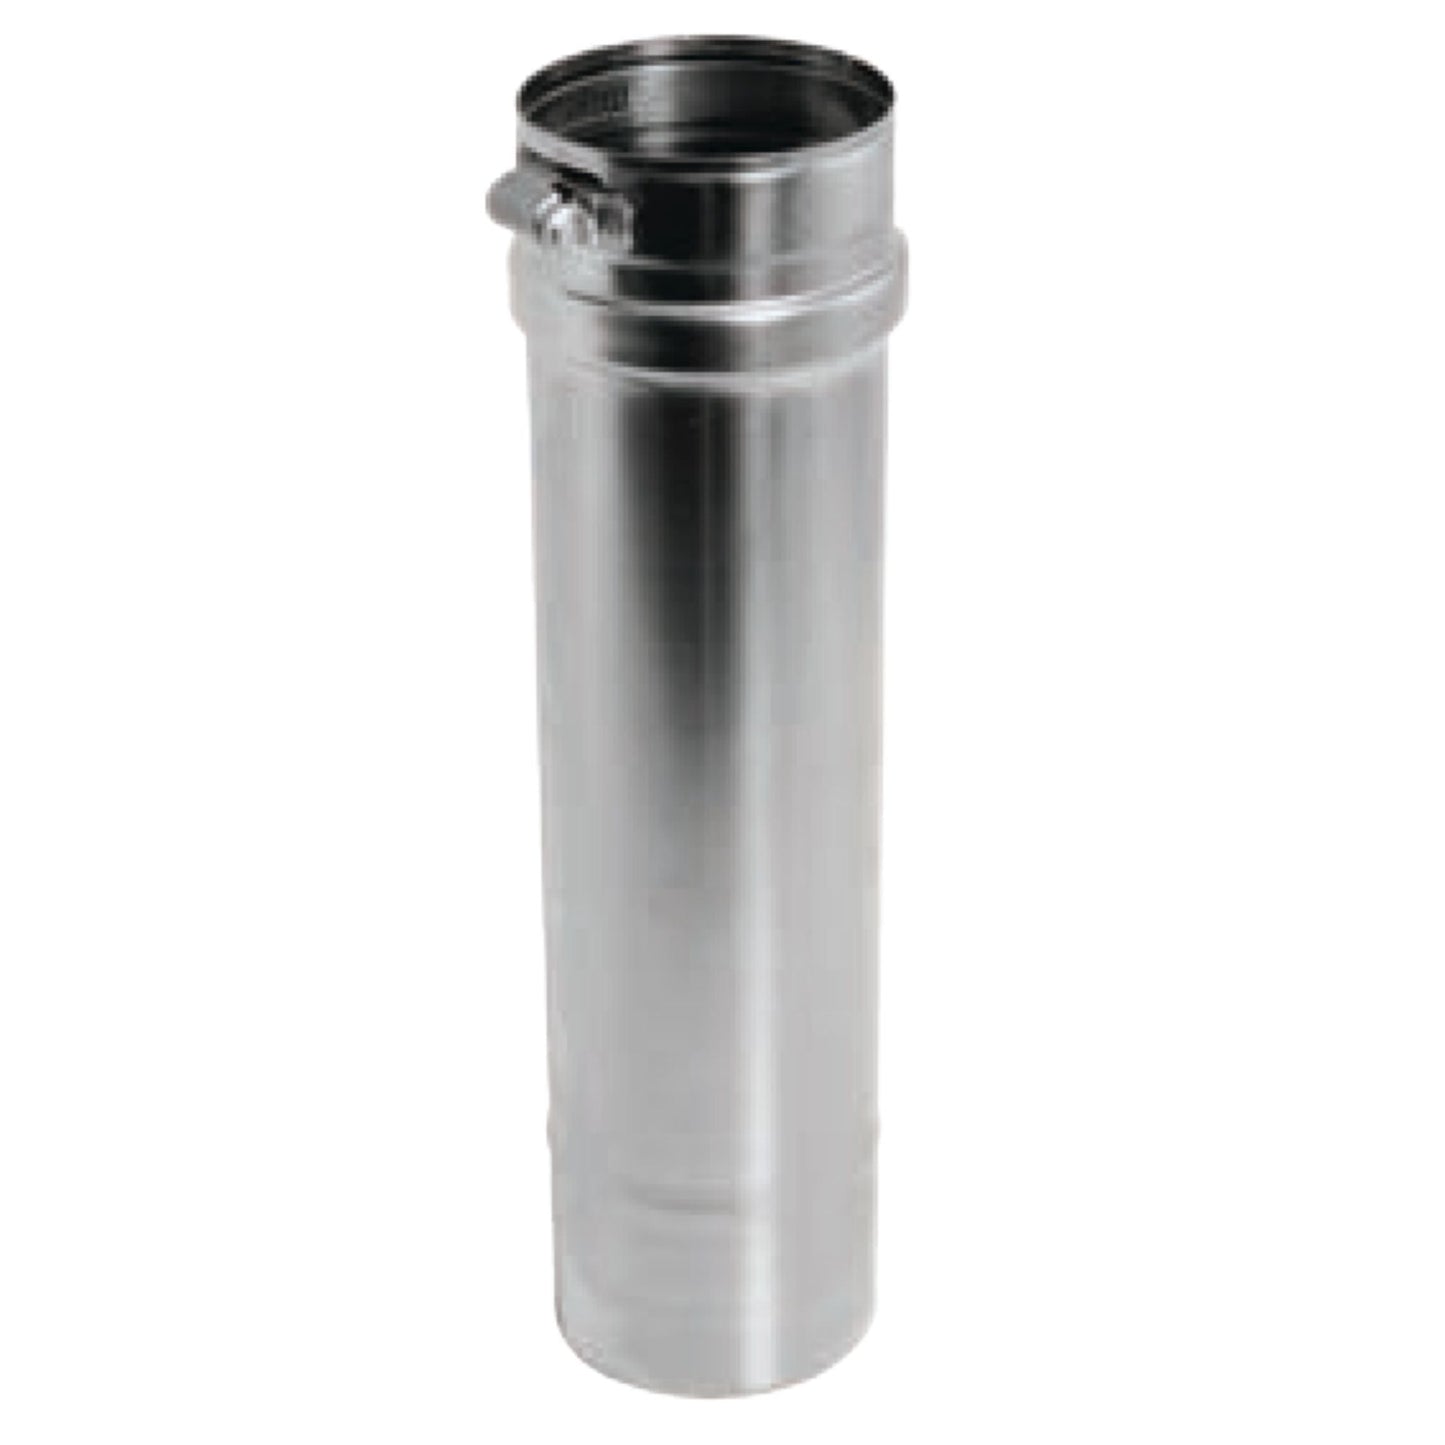 DuraVent FasNSeal 16" x 18" 29-4C Stainless Steel Vent Length